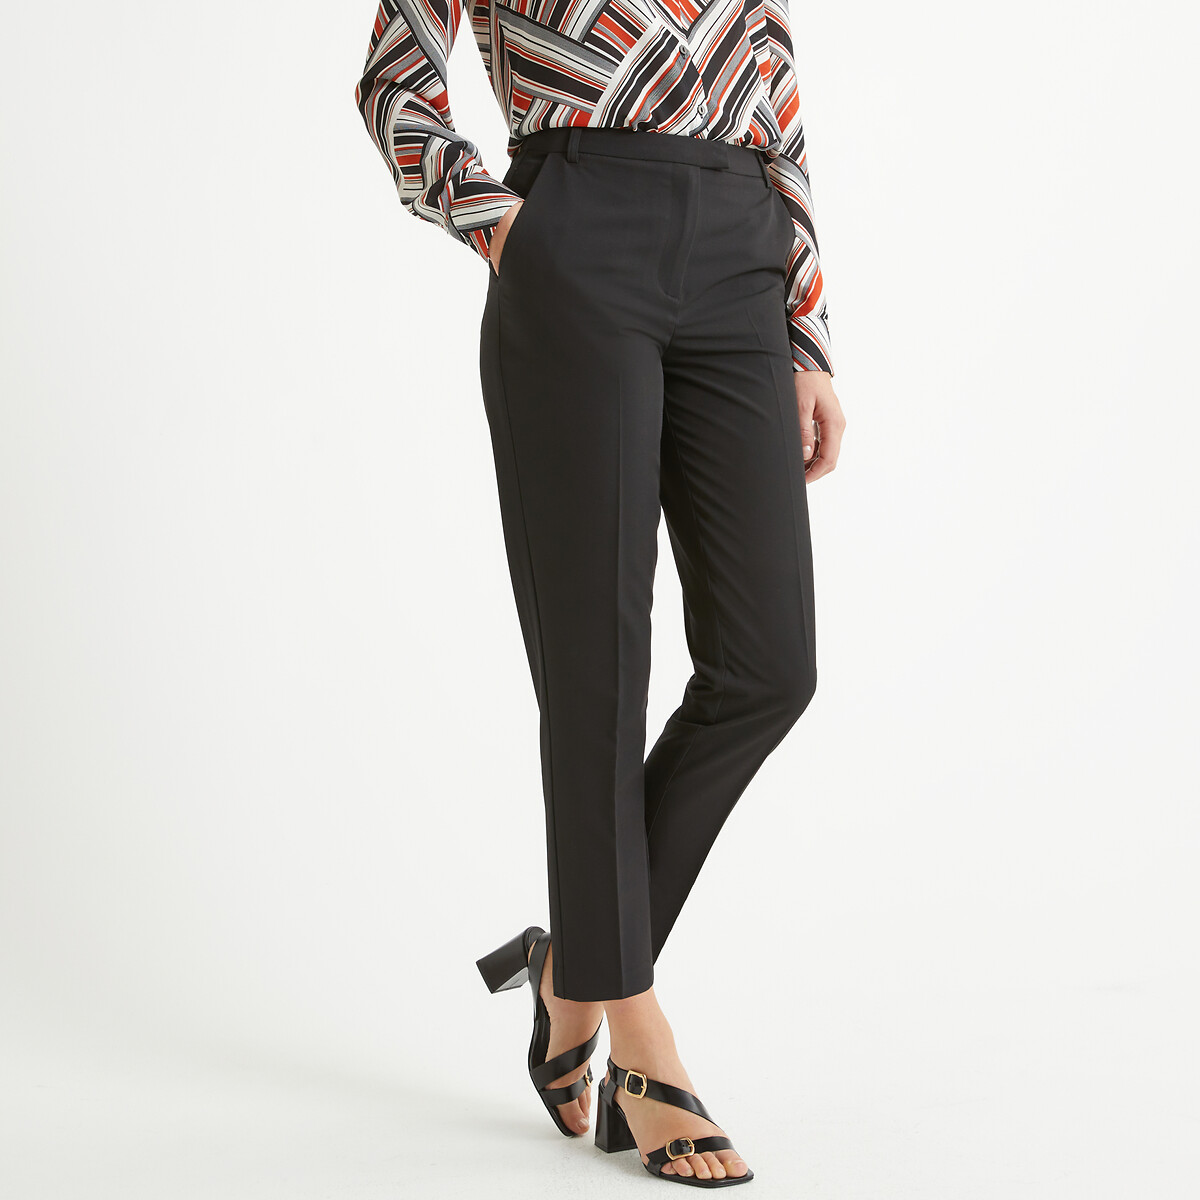 Image of Recycled Peg Trousers, Length 26.5"